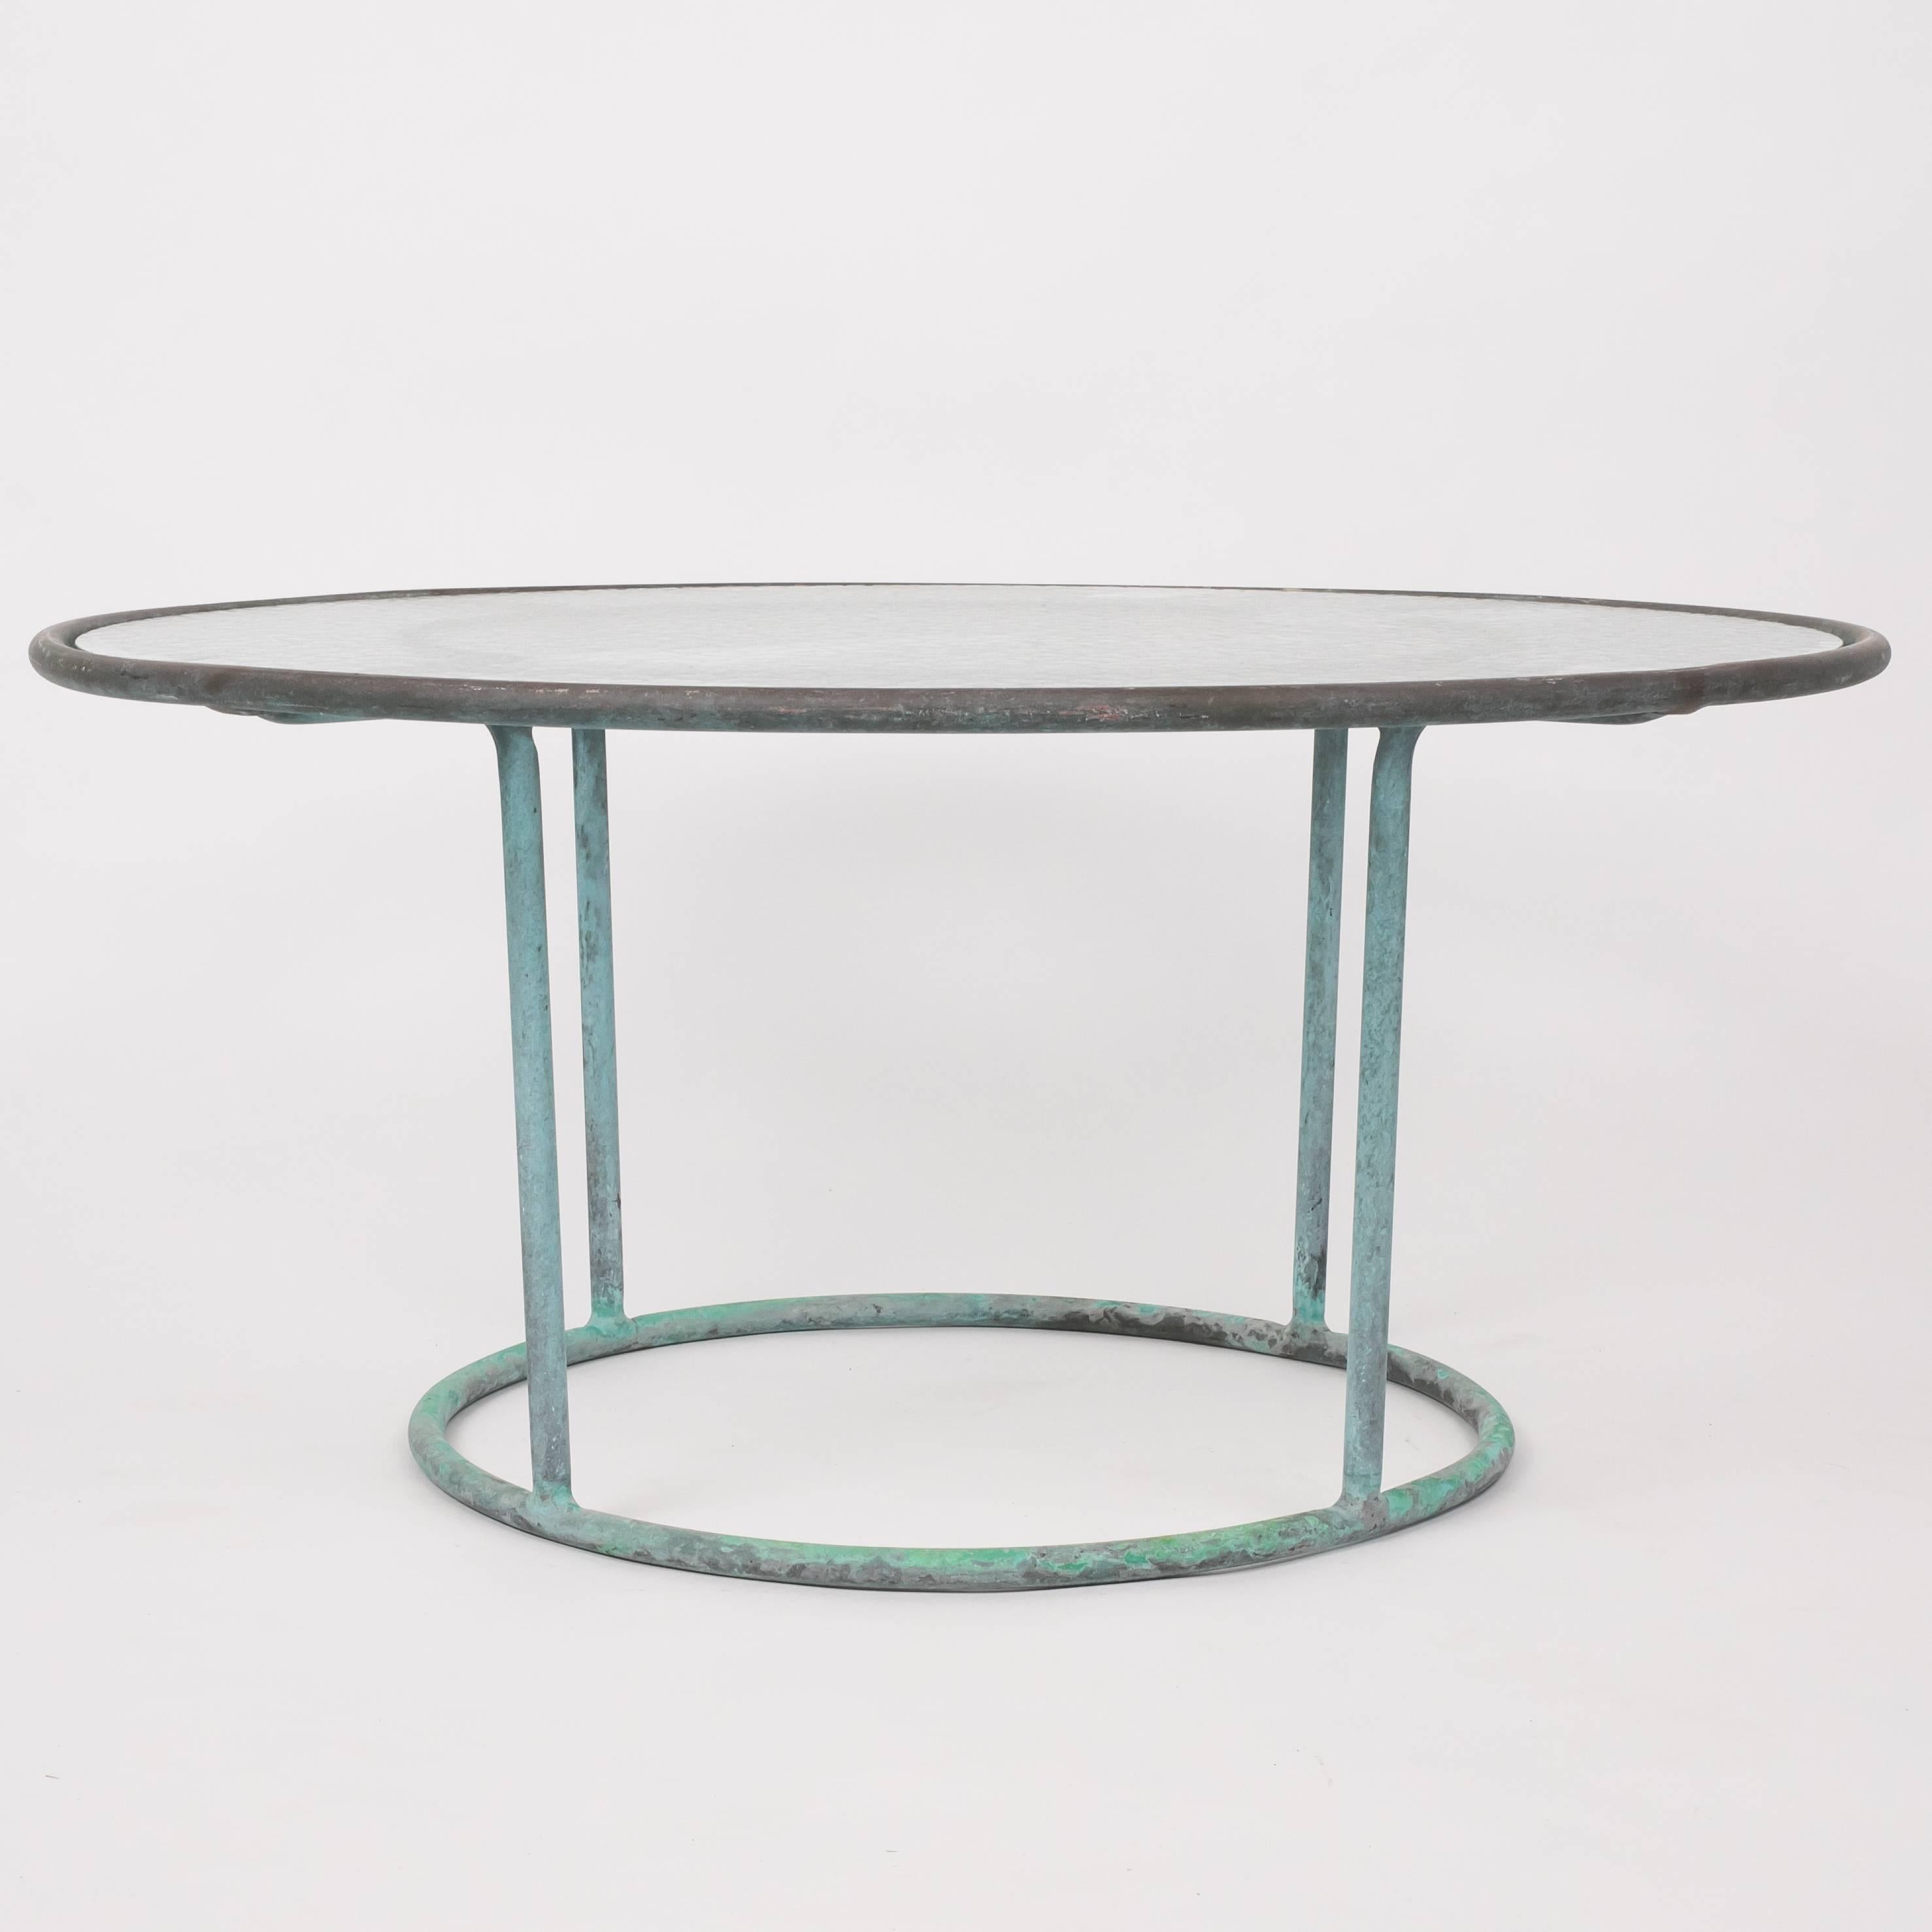 A patio coffee table in patinated bronze designed by Walter Lamb and produced by Brown Jordan. The monumental frame is described by two concentric rings of bronze with radial supports and a circular bronze base. The round tabletop is a single piece